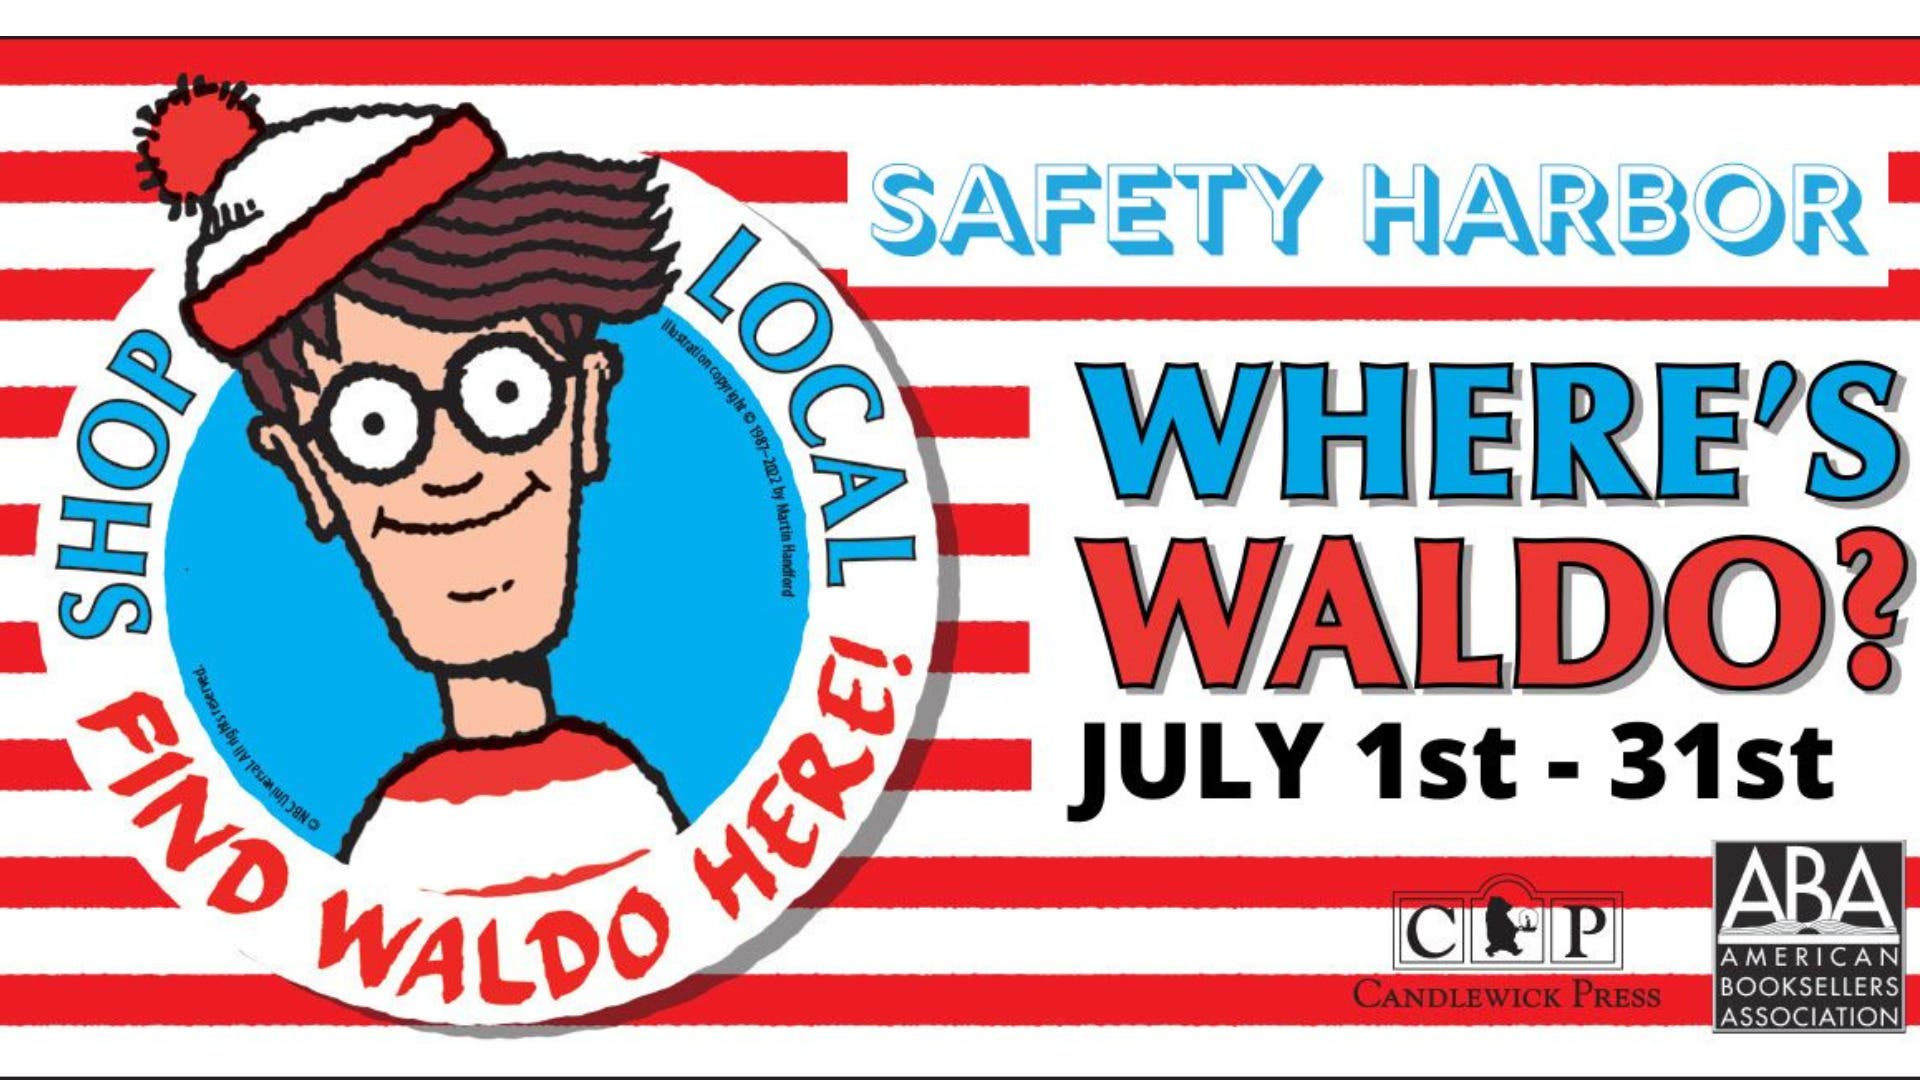 Find Waldo in Safety Harbor this July!